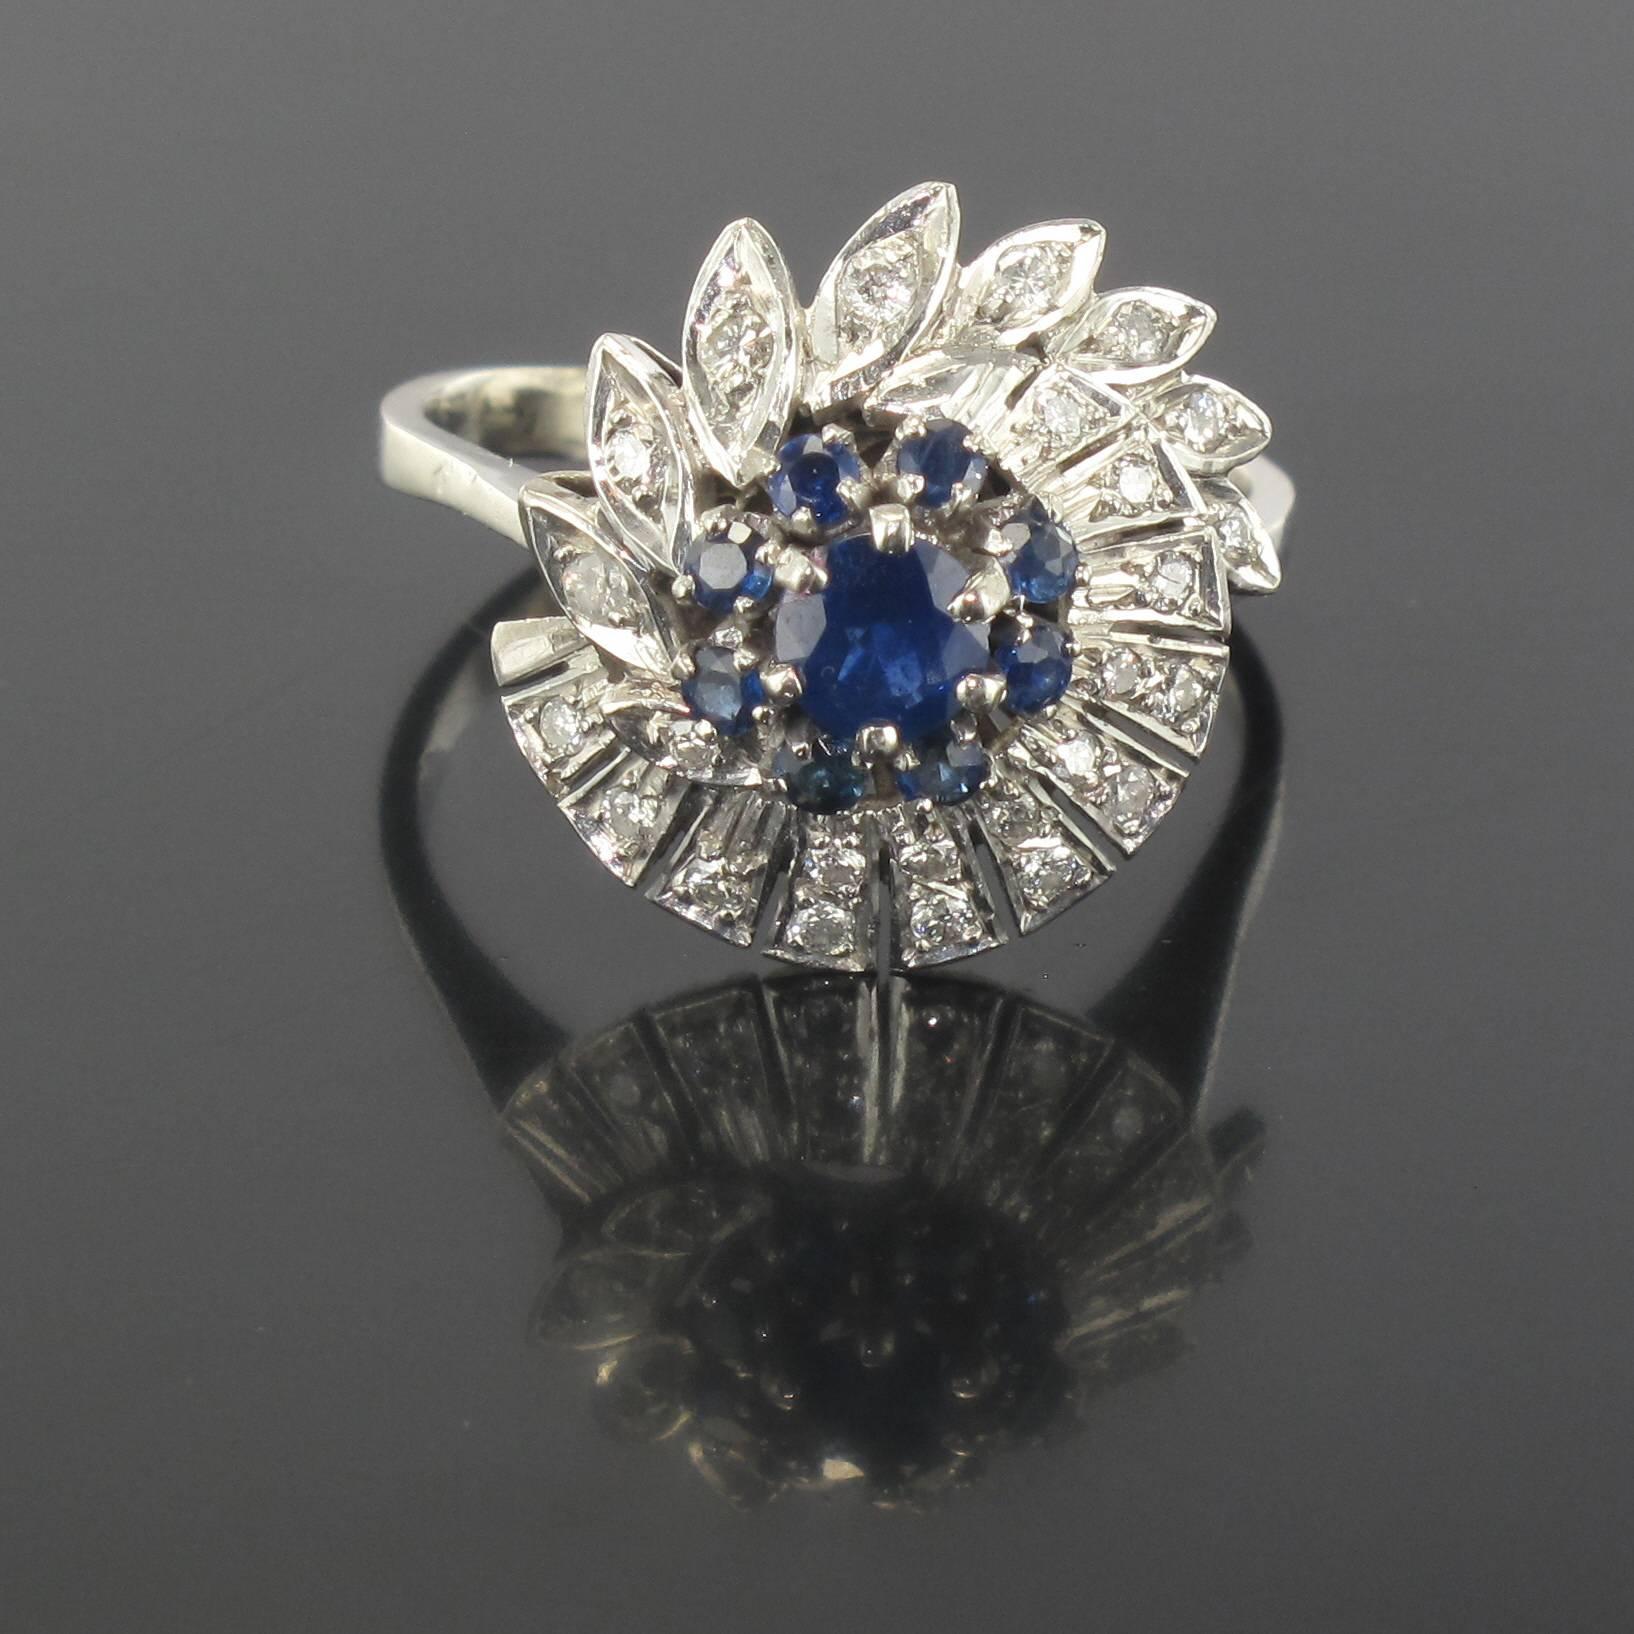 Platinum ring, dog hallmark.

This ring is set with a round sapphire surrounded by 8 small blue sapphires. The head is bordered by a spiral that is set with diamonds in a bar type design on one side and marquise design on the other. 

Total